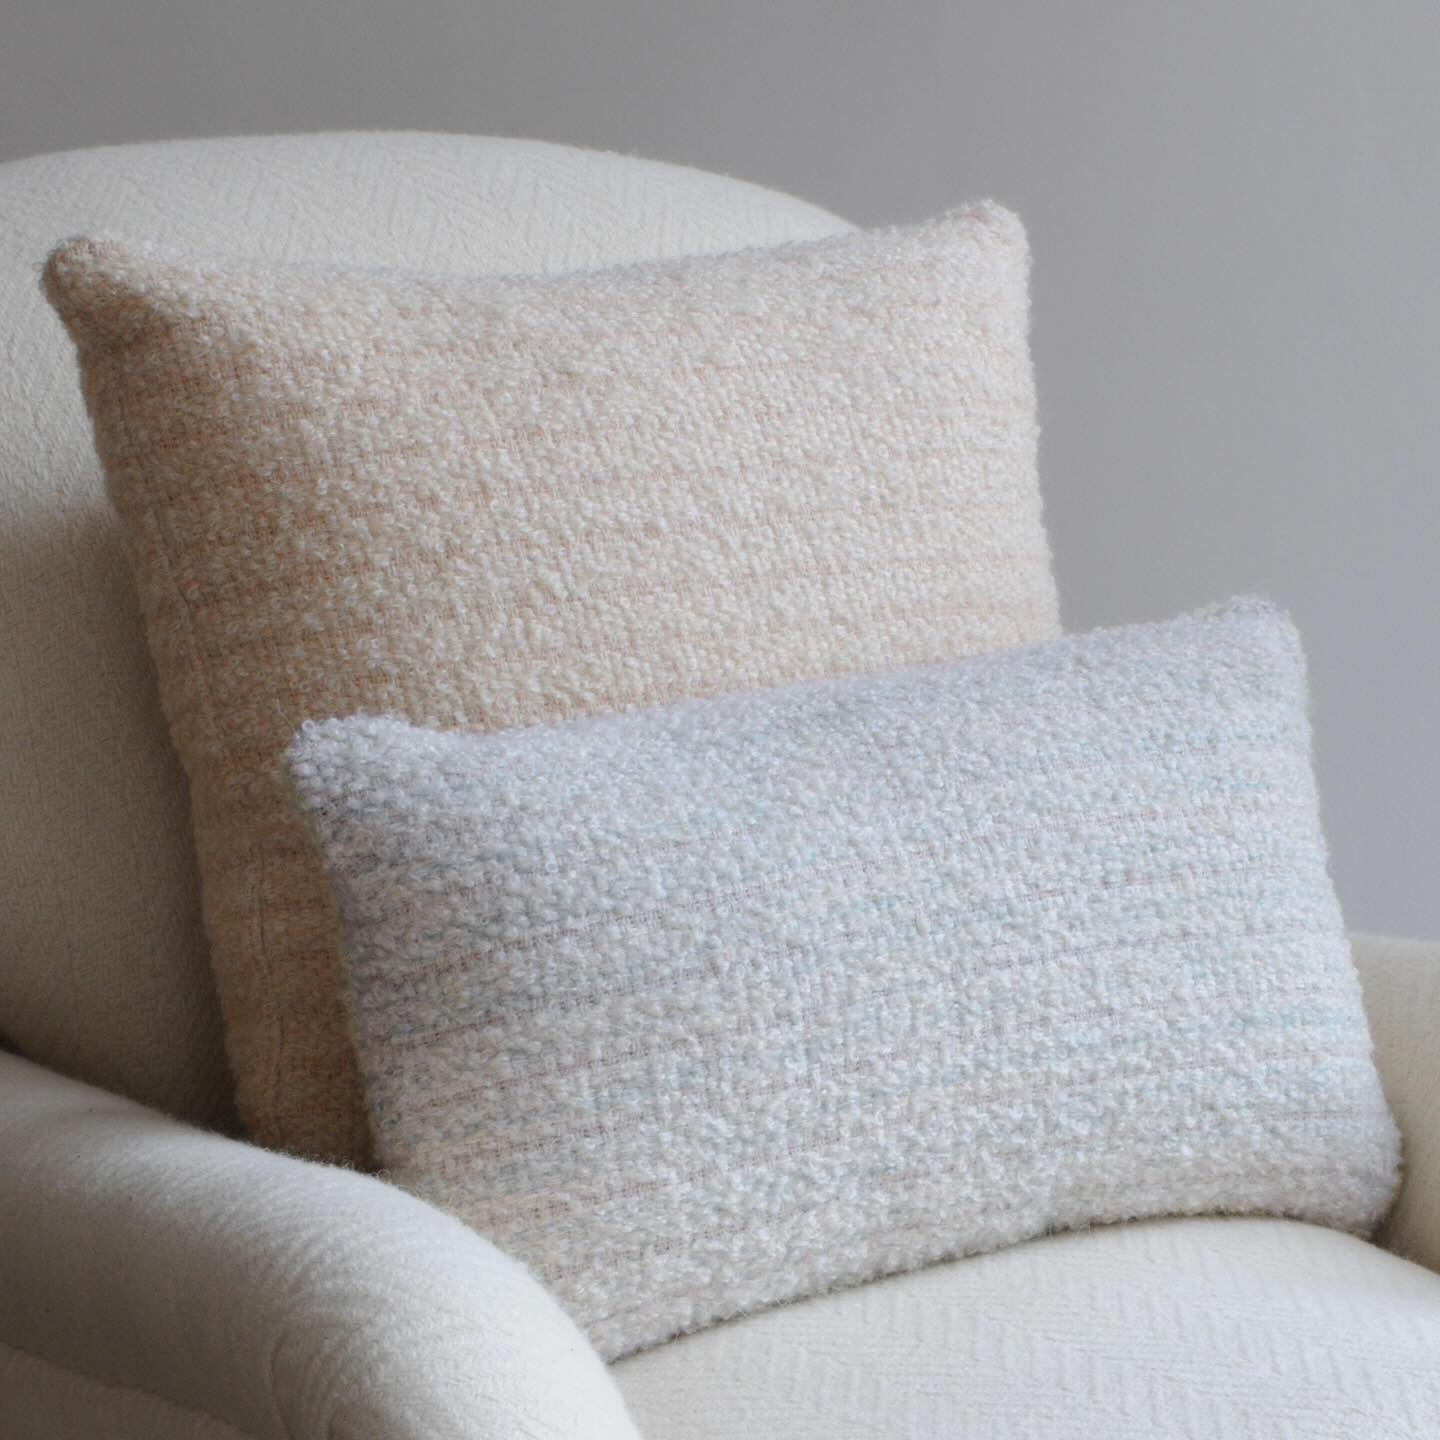 Limited edition cushions now available @roseuniacke 

Working with Rose and her team, I have developed two unique fabrics inspired by the colours and textures from the Rose Uniacke permanent fabric collection. Handwoven in the studio, the fabrics are